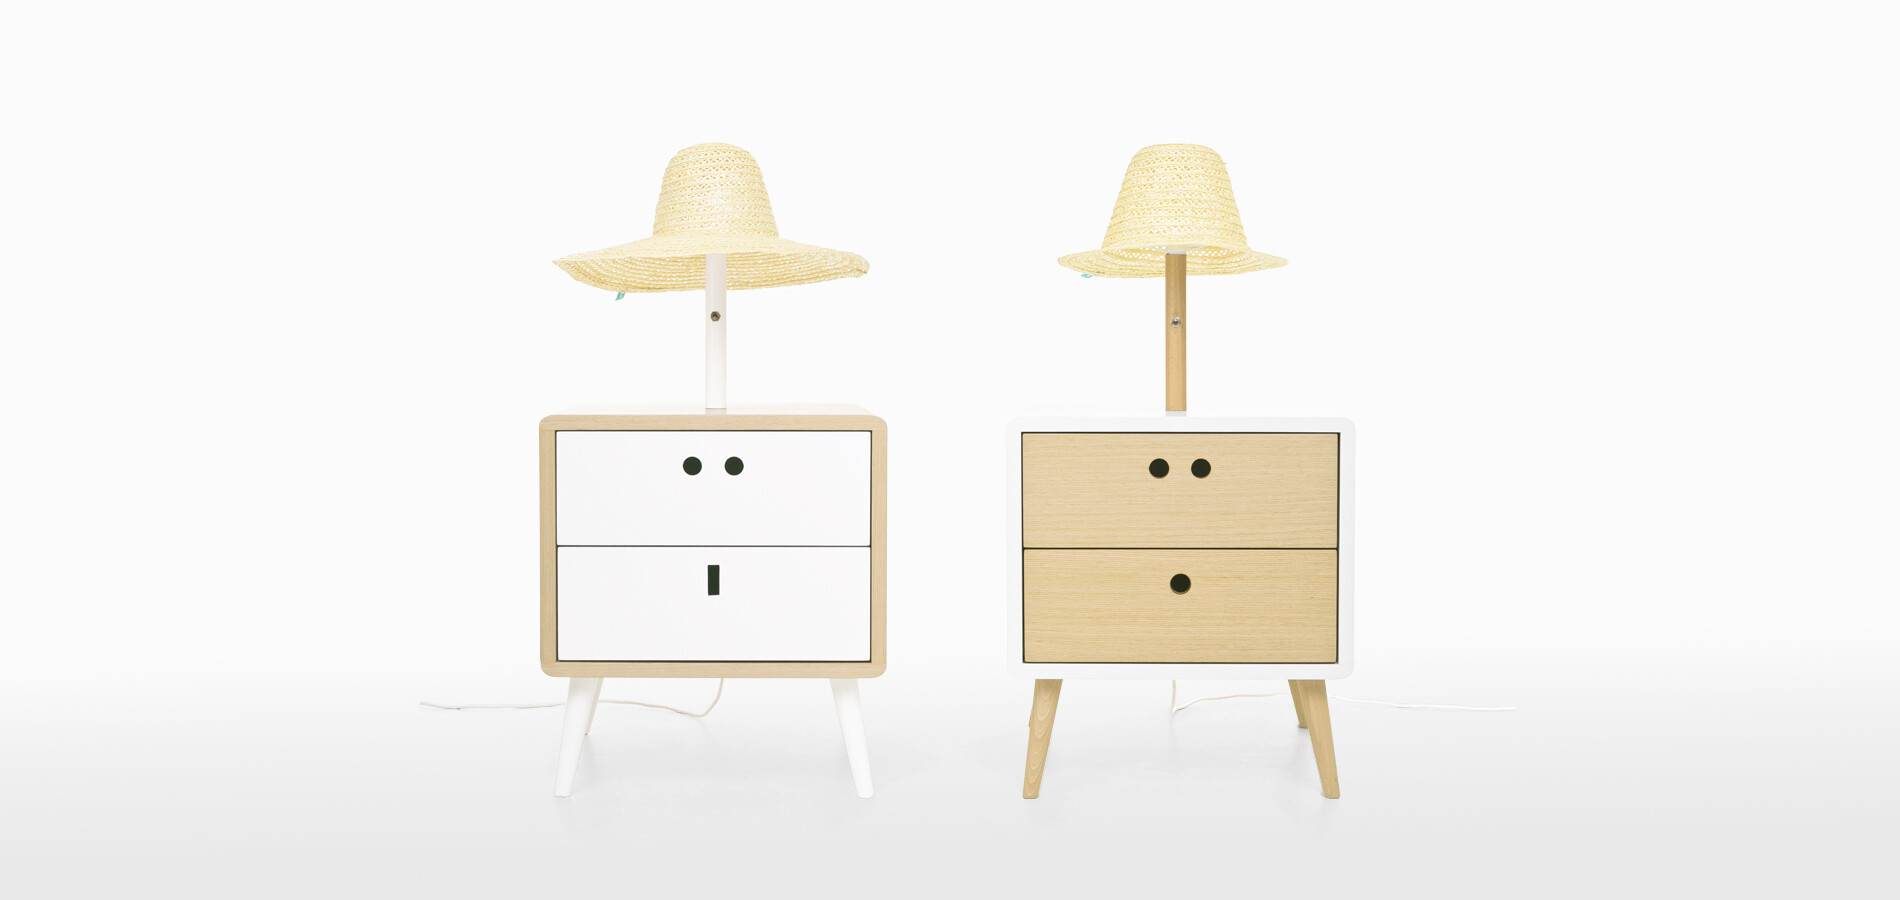 Eco-friendly furniture inspired by Portuguese traditions - HomeWorldDesign (14)